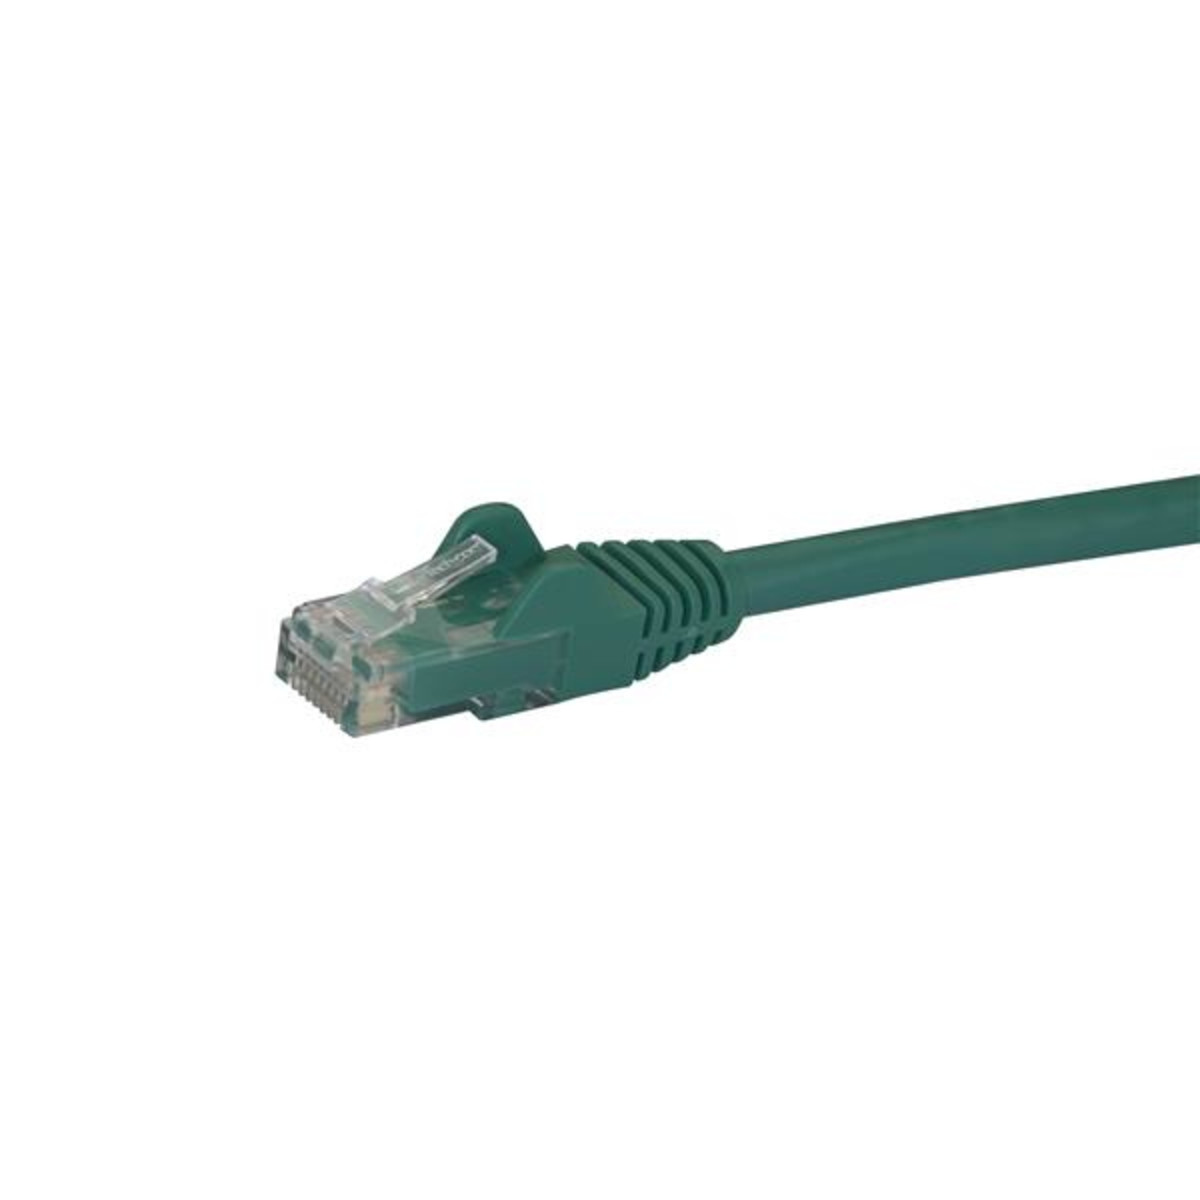 10m Green Snagless UTP Cat6 Patch Cable